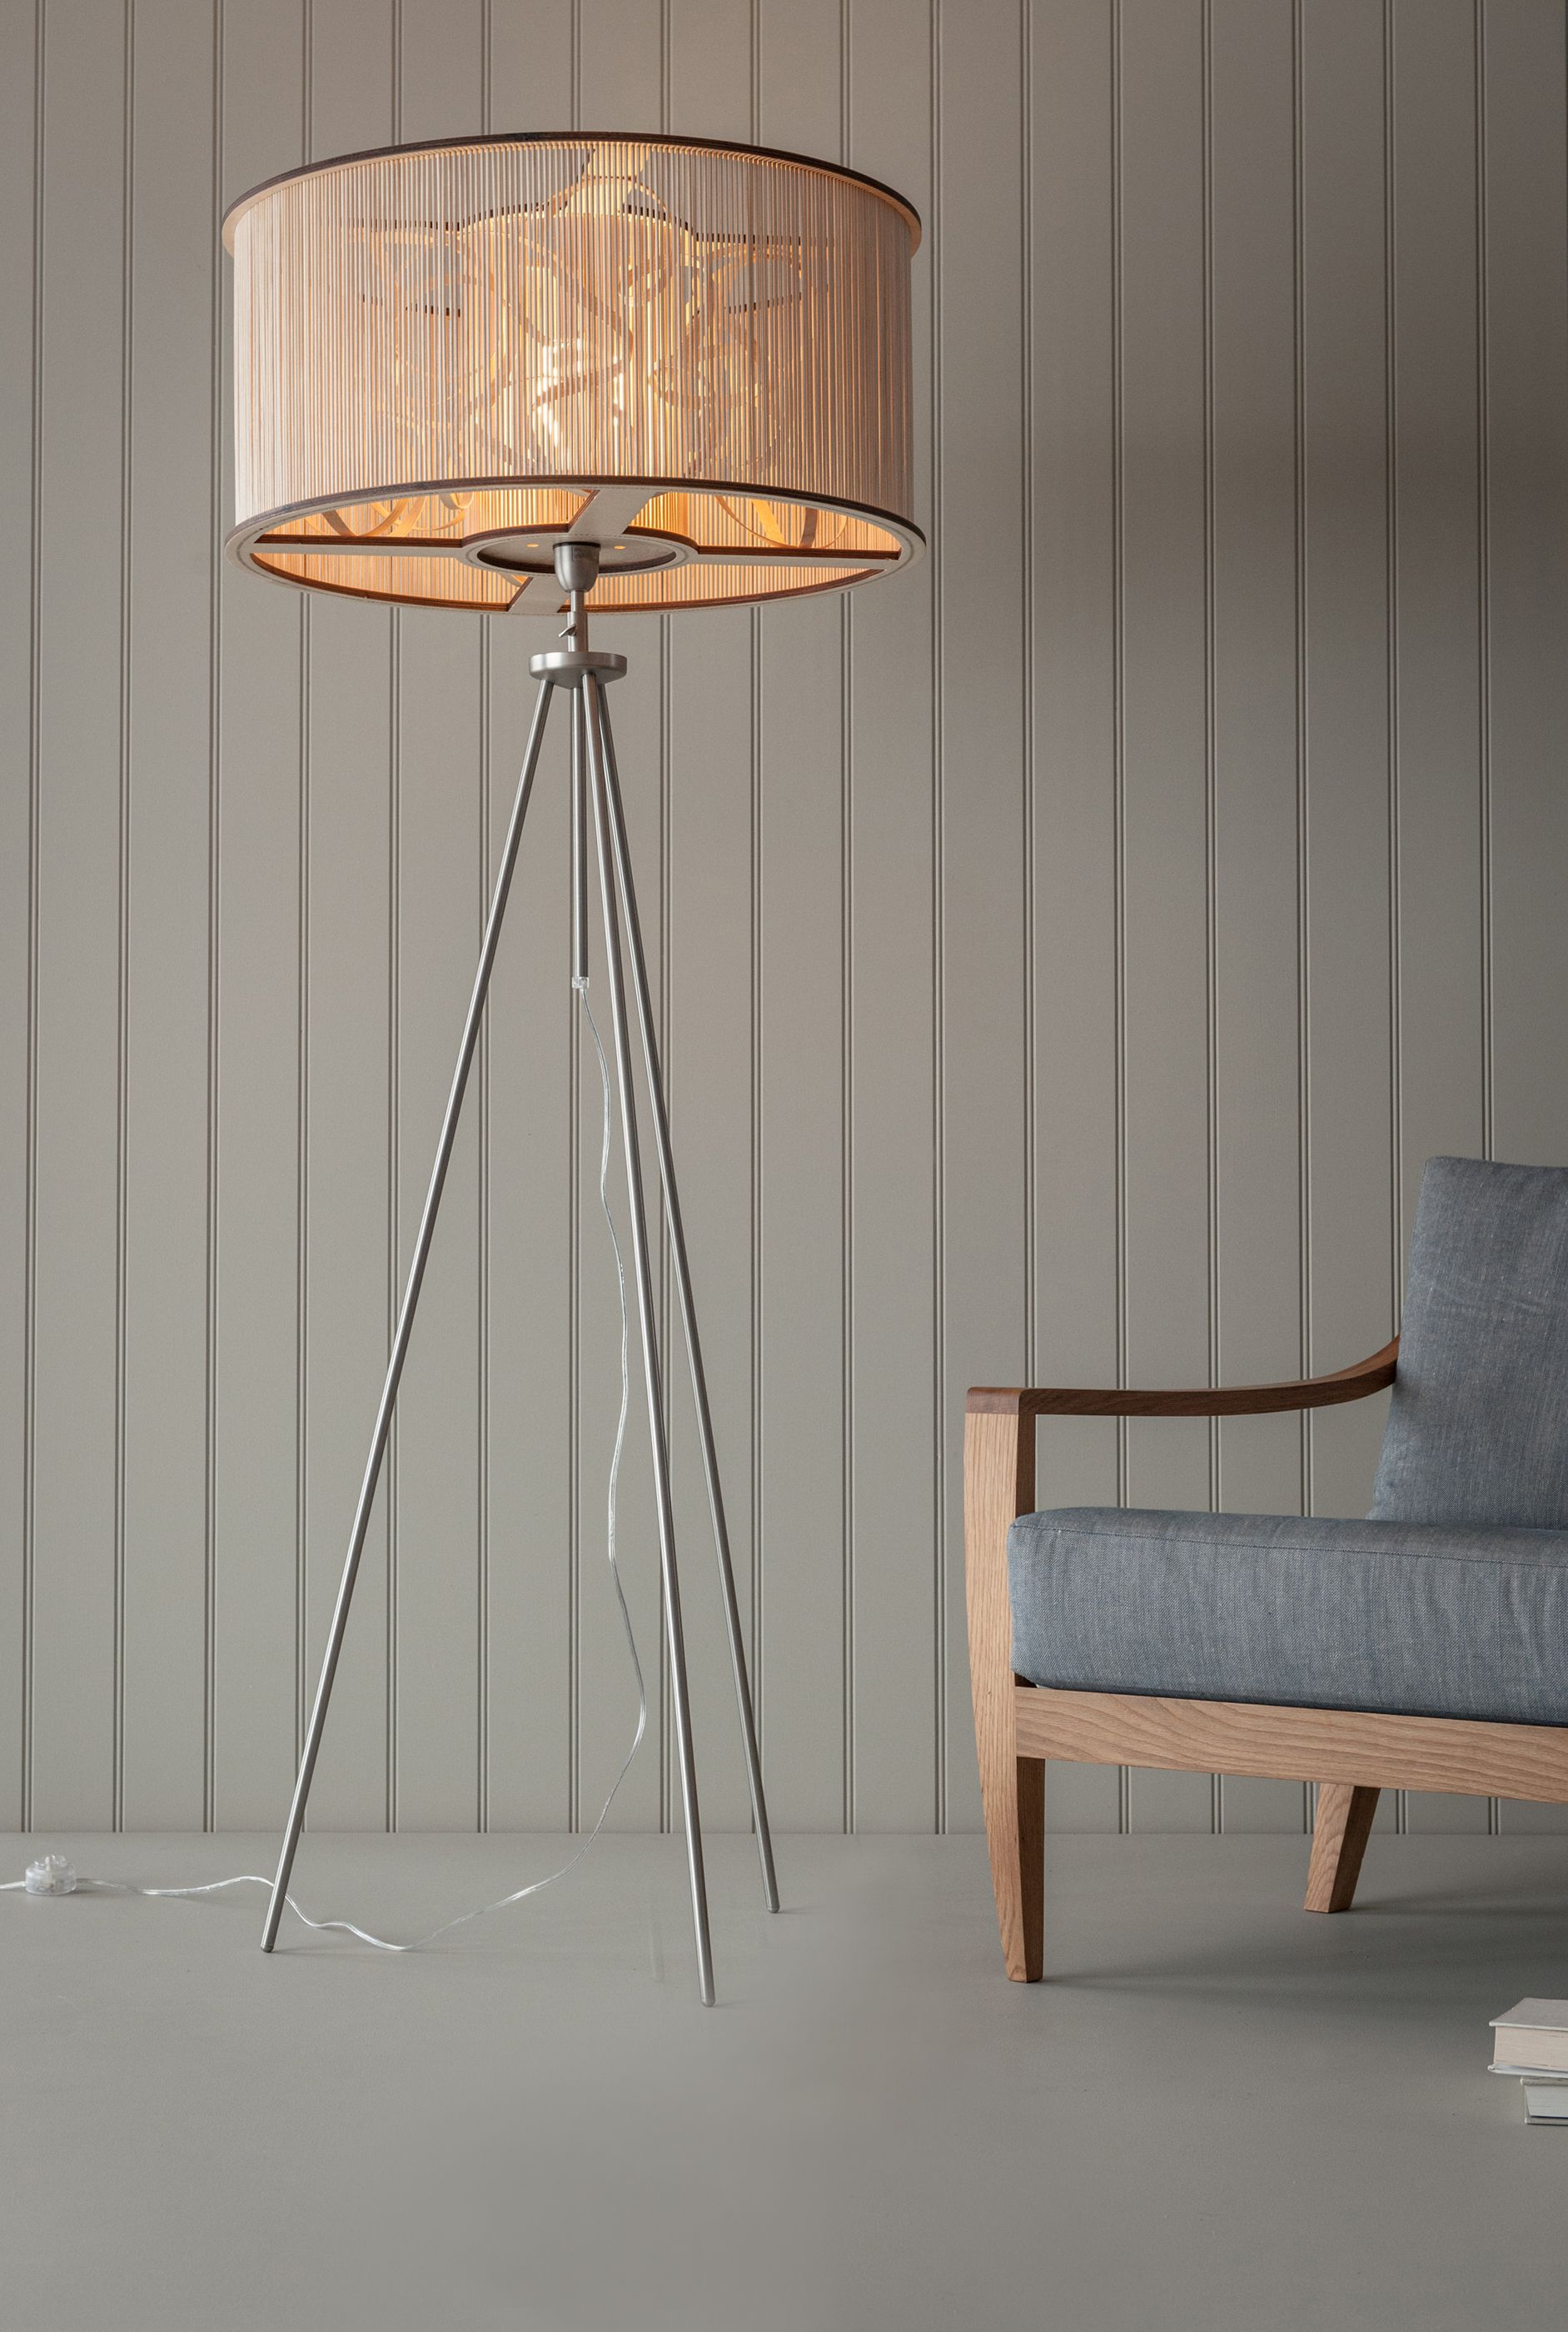 Large Cage Floor Light Tom Raffield Wooden Floor Lamps intended for dimensions 1883 X 2800